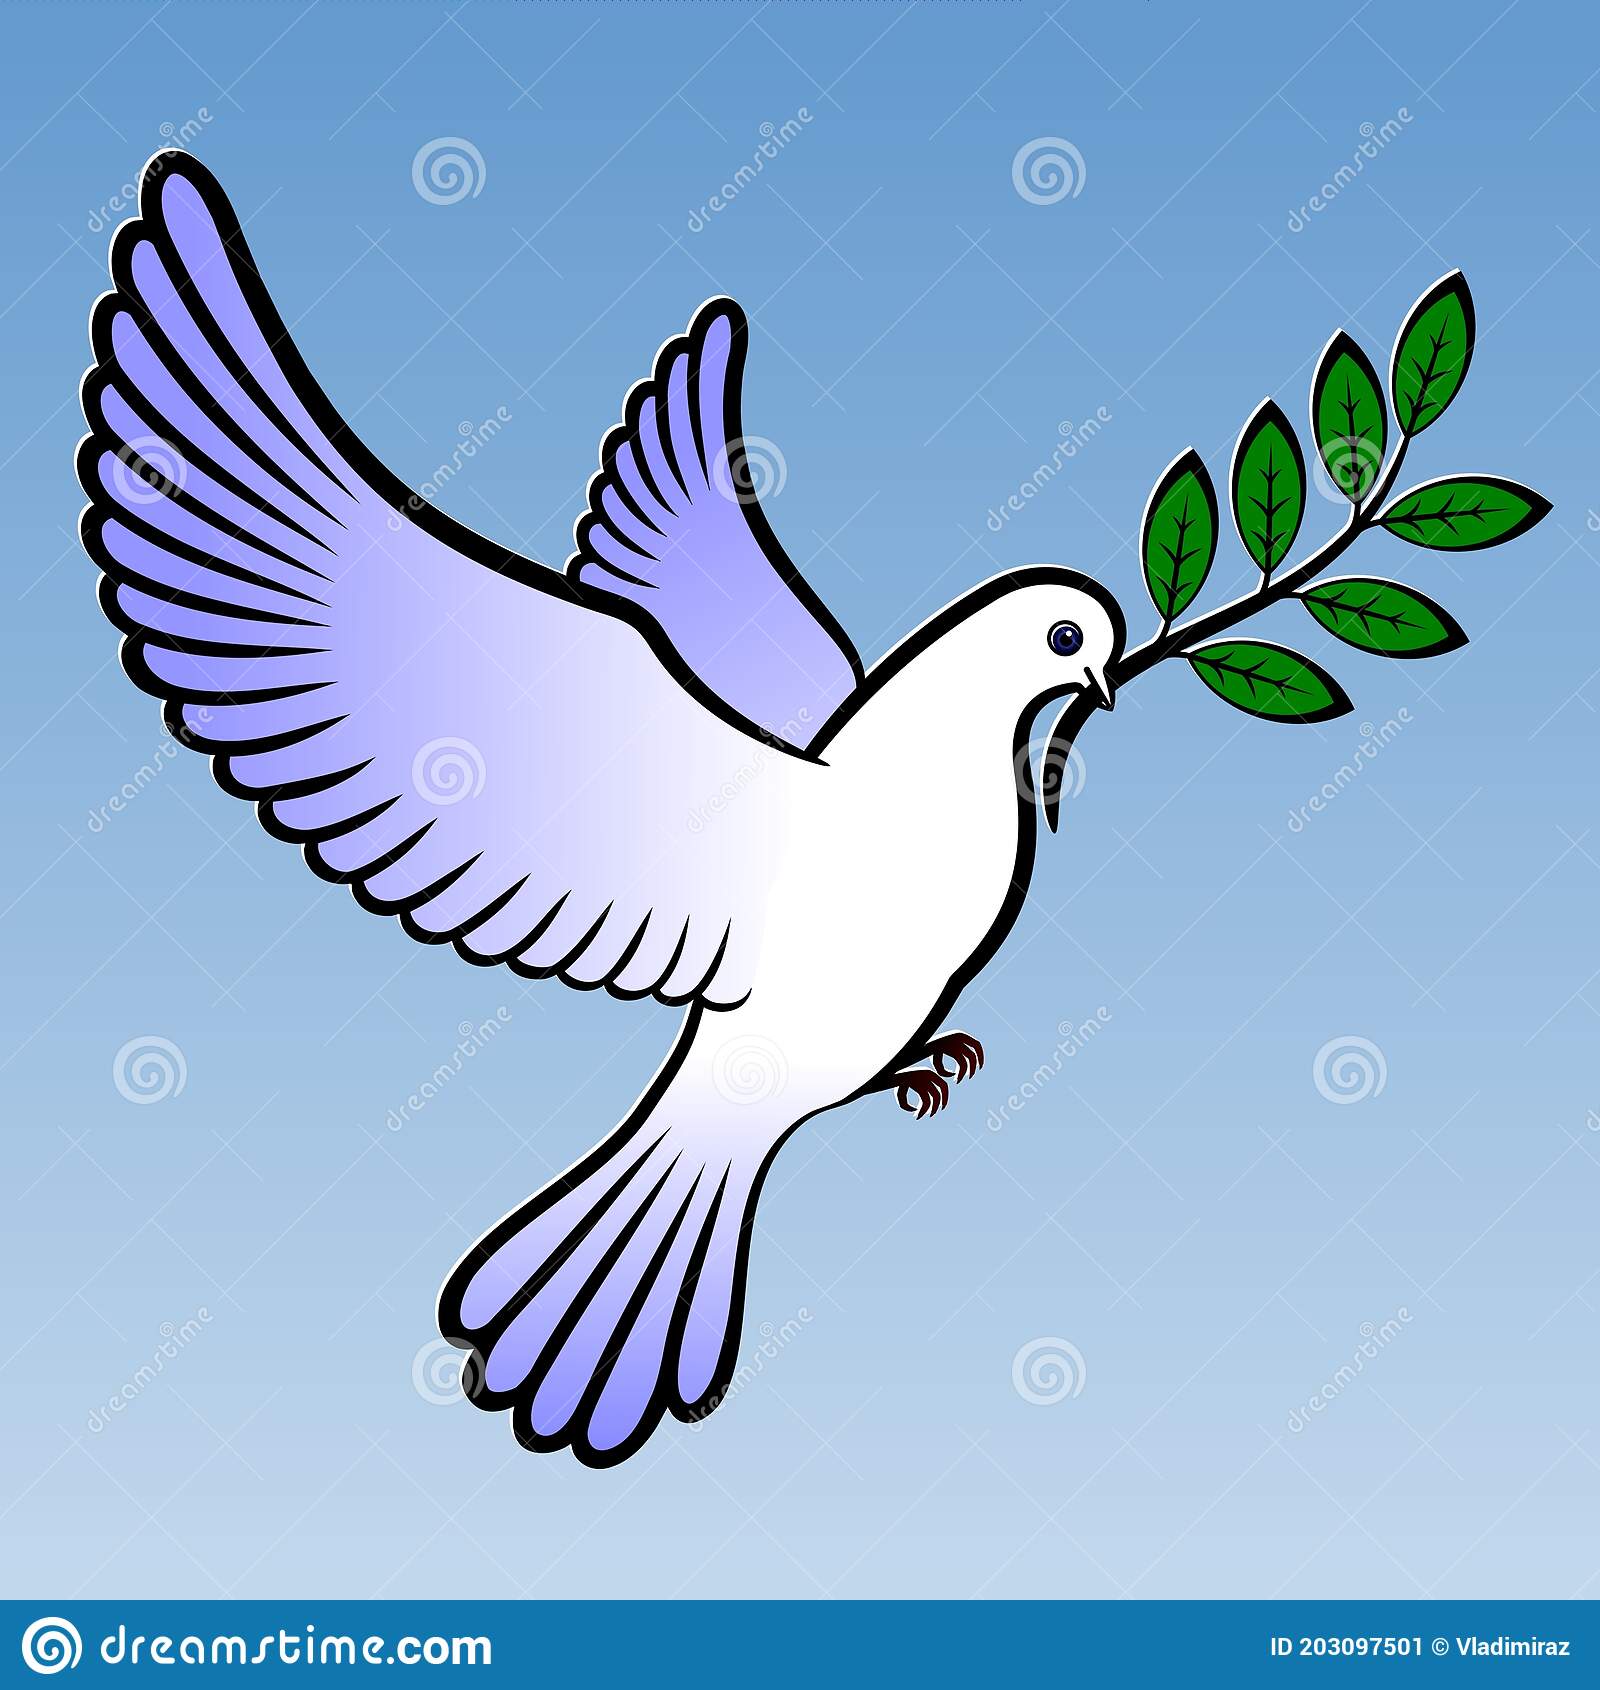 Why is the Dove a symbol of peace?